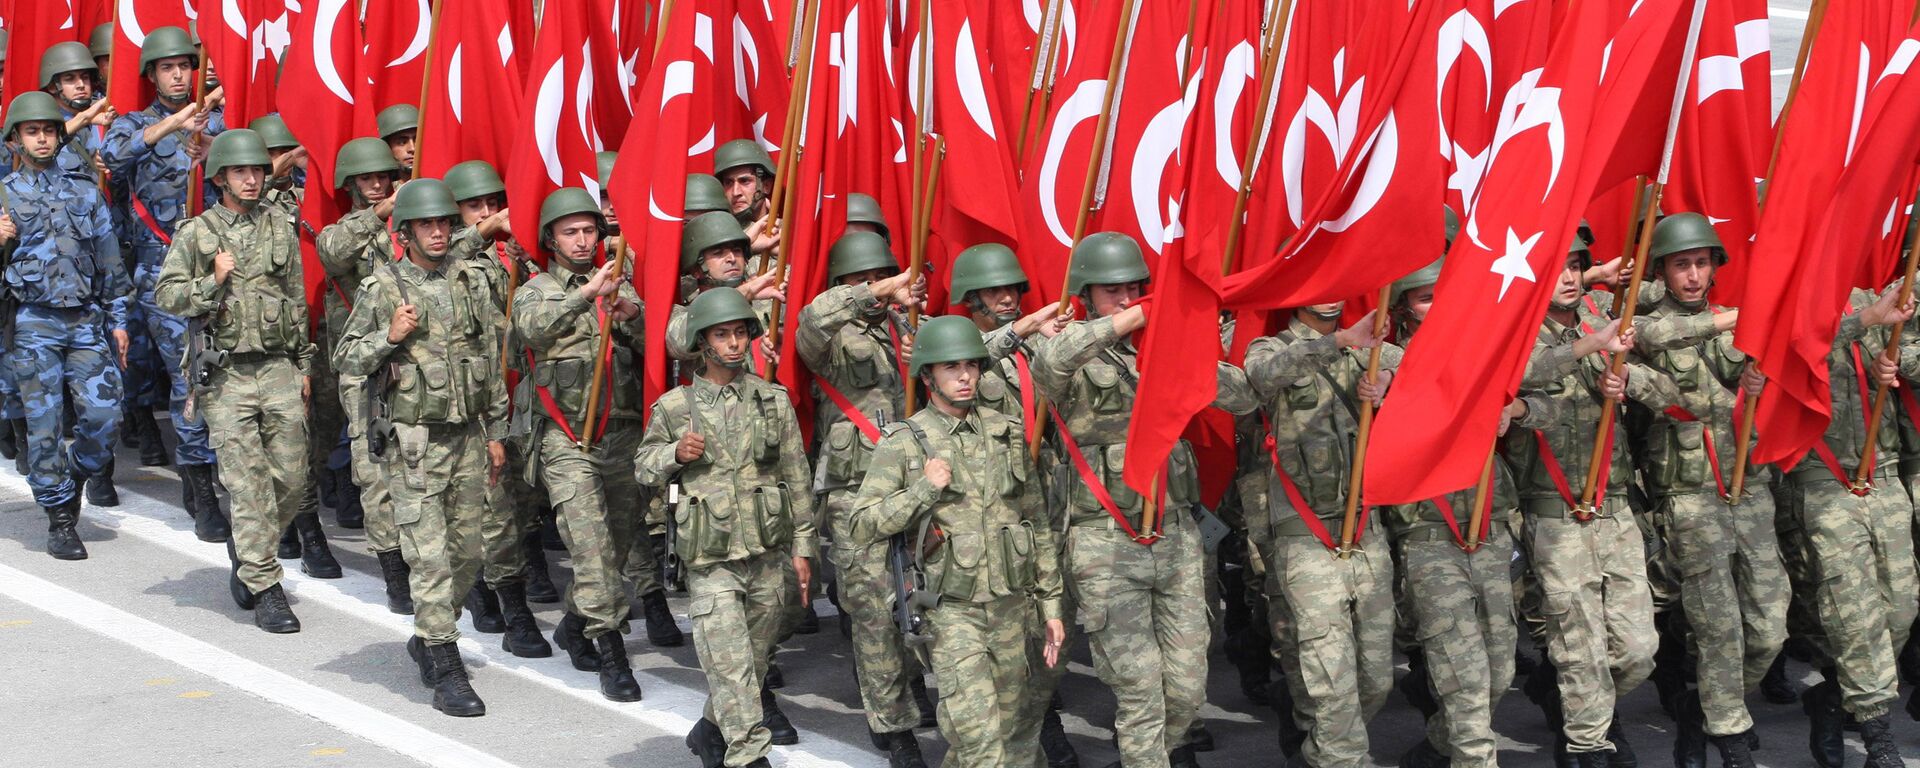 Troops parade with Turkish flag on August 30, 2013, in Ankara during celebrations for the 91st anniversary of Victory Day, with ceremonies held at Ataturk's Mausoleum known as Anitkabir in Ankara, Turkiye. - Sputnik International, 1920, 30.04.2023